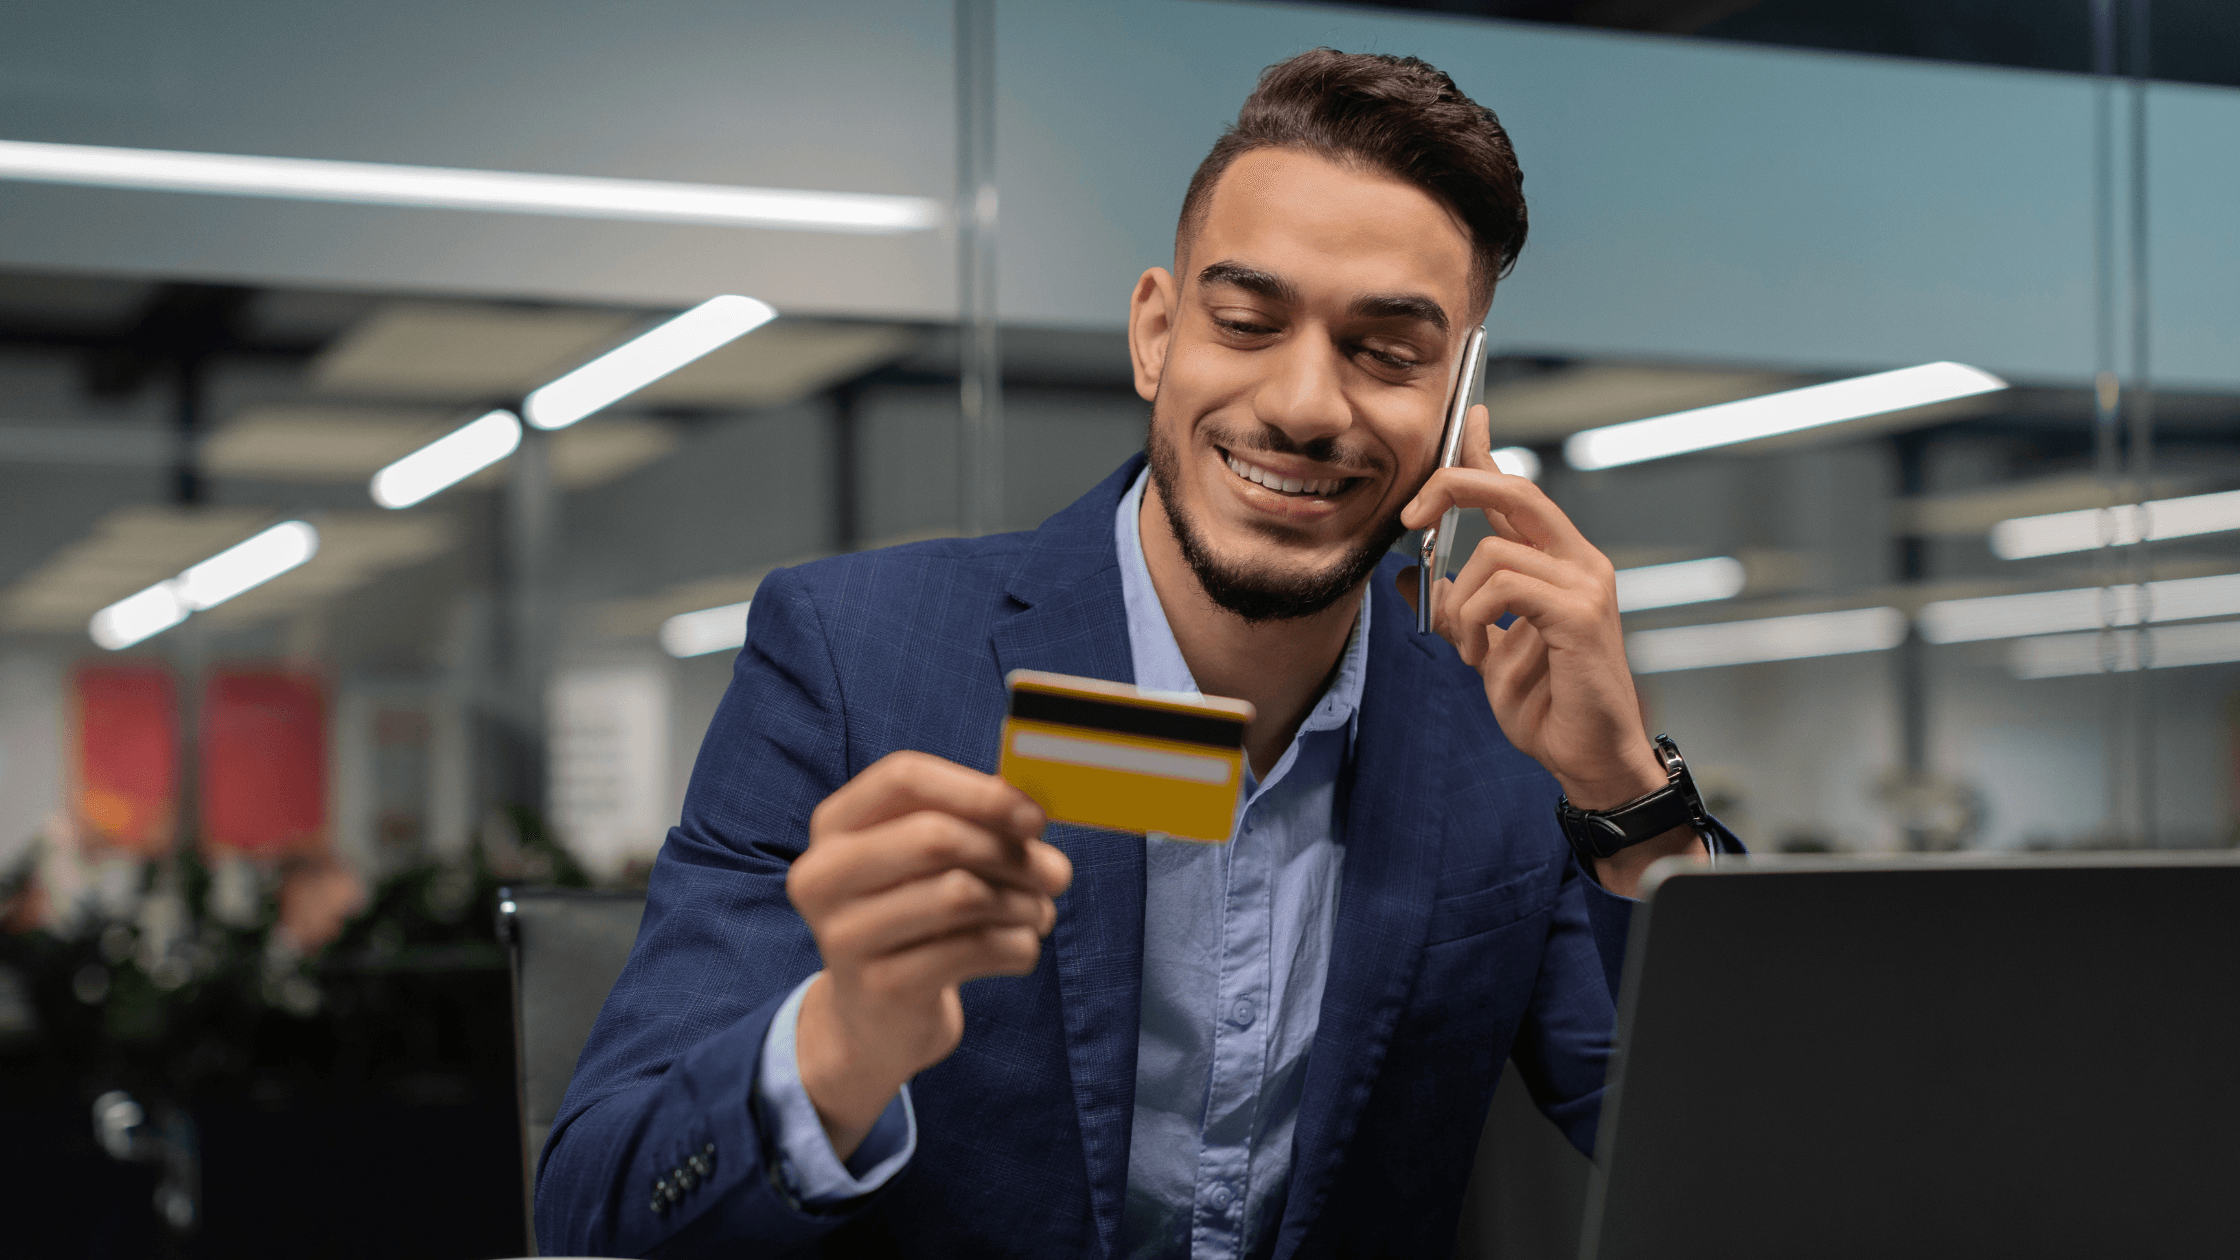 Top 3 Reasons Why Employees Need PCI DSS Training